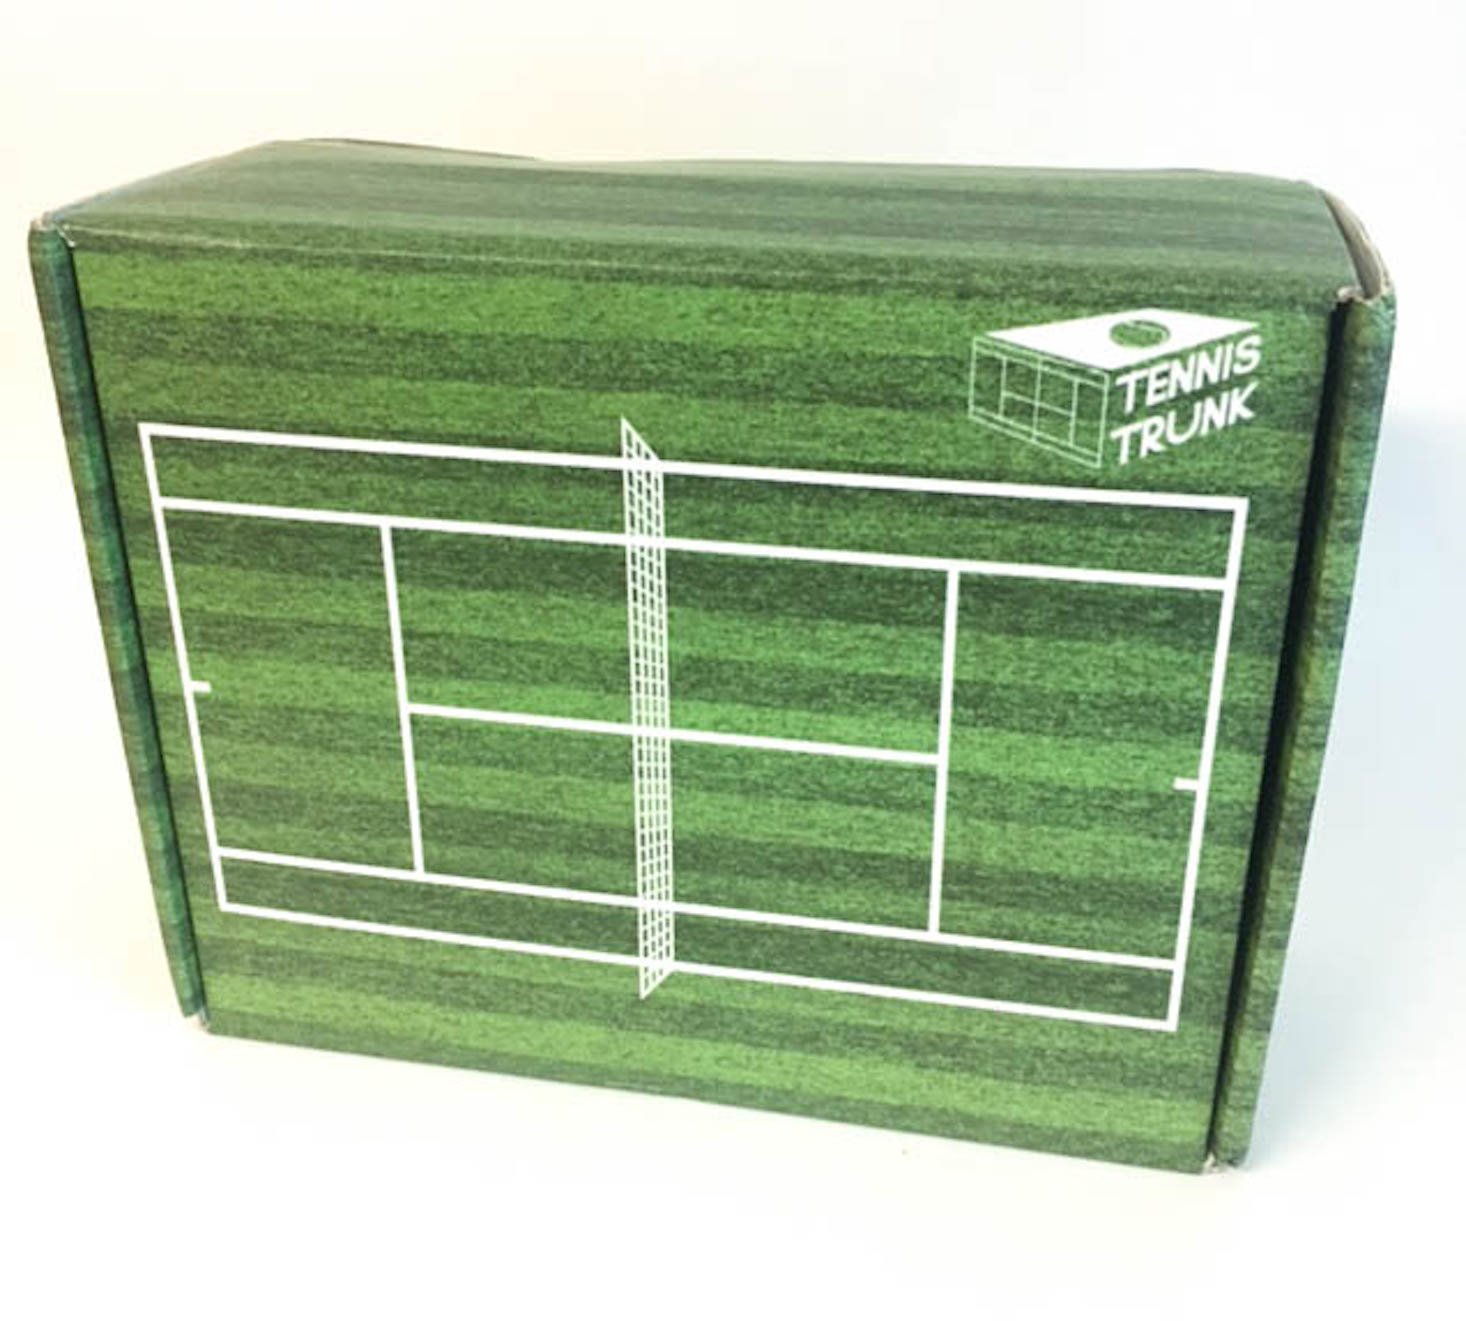 Tennis Trunk Subscription Box Review + Coupon – October 2017